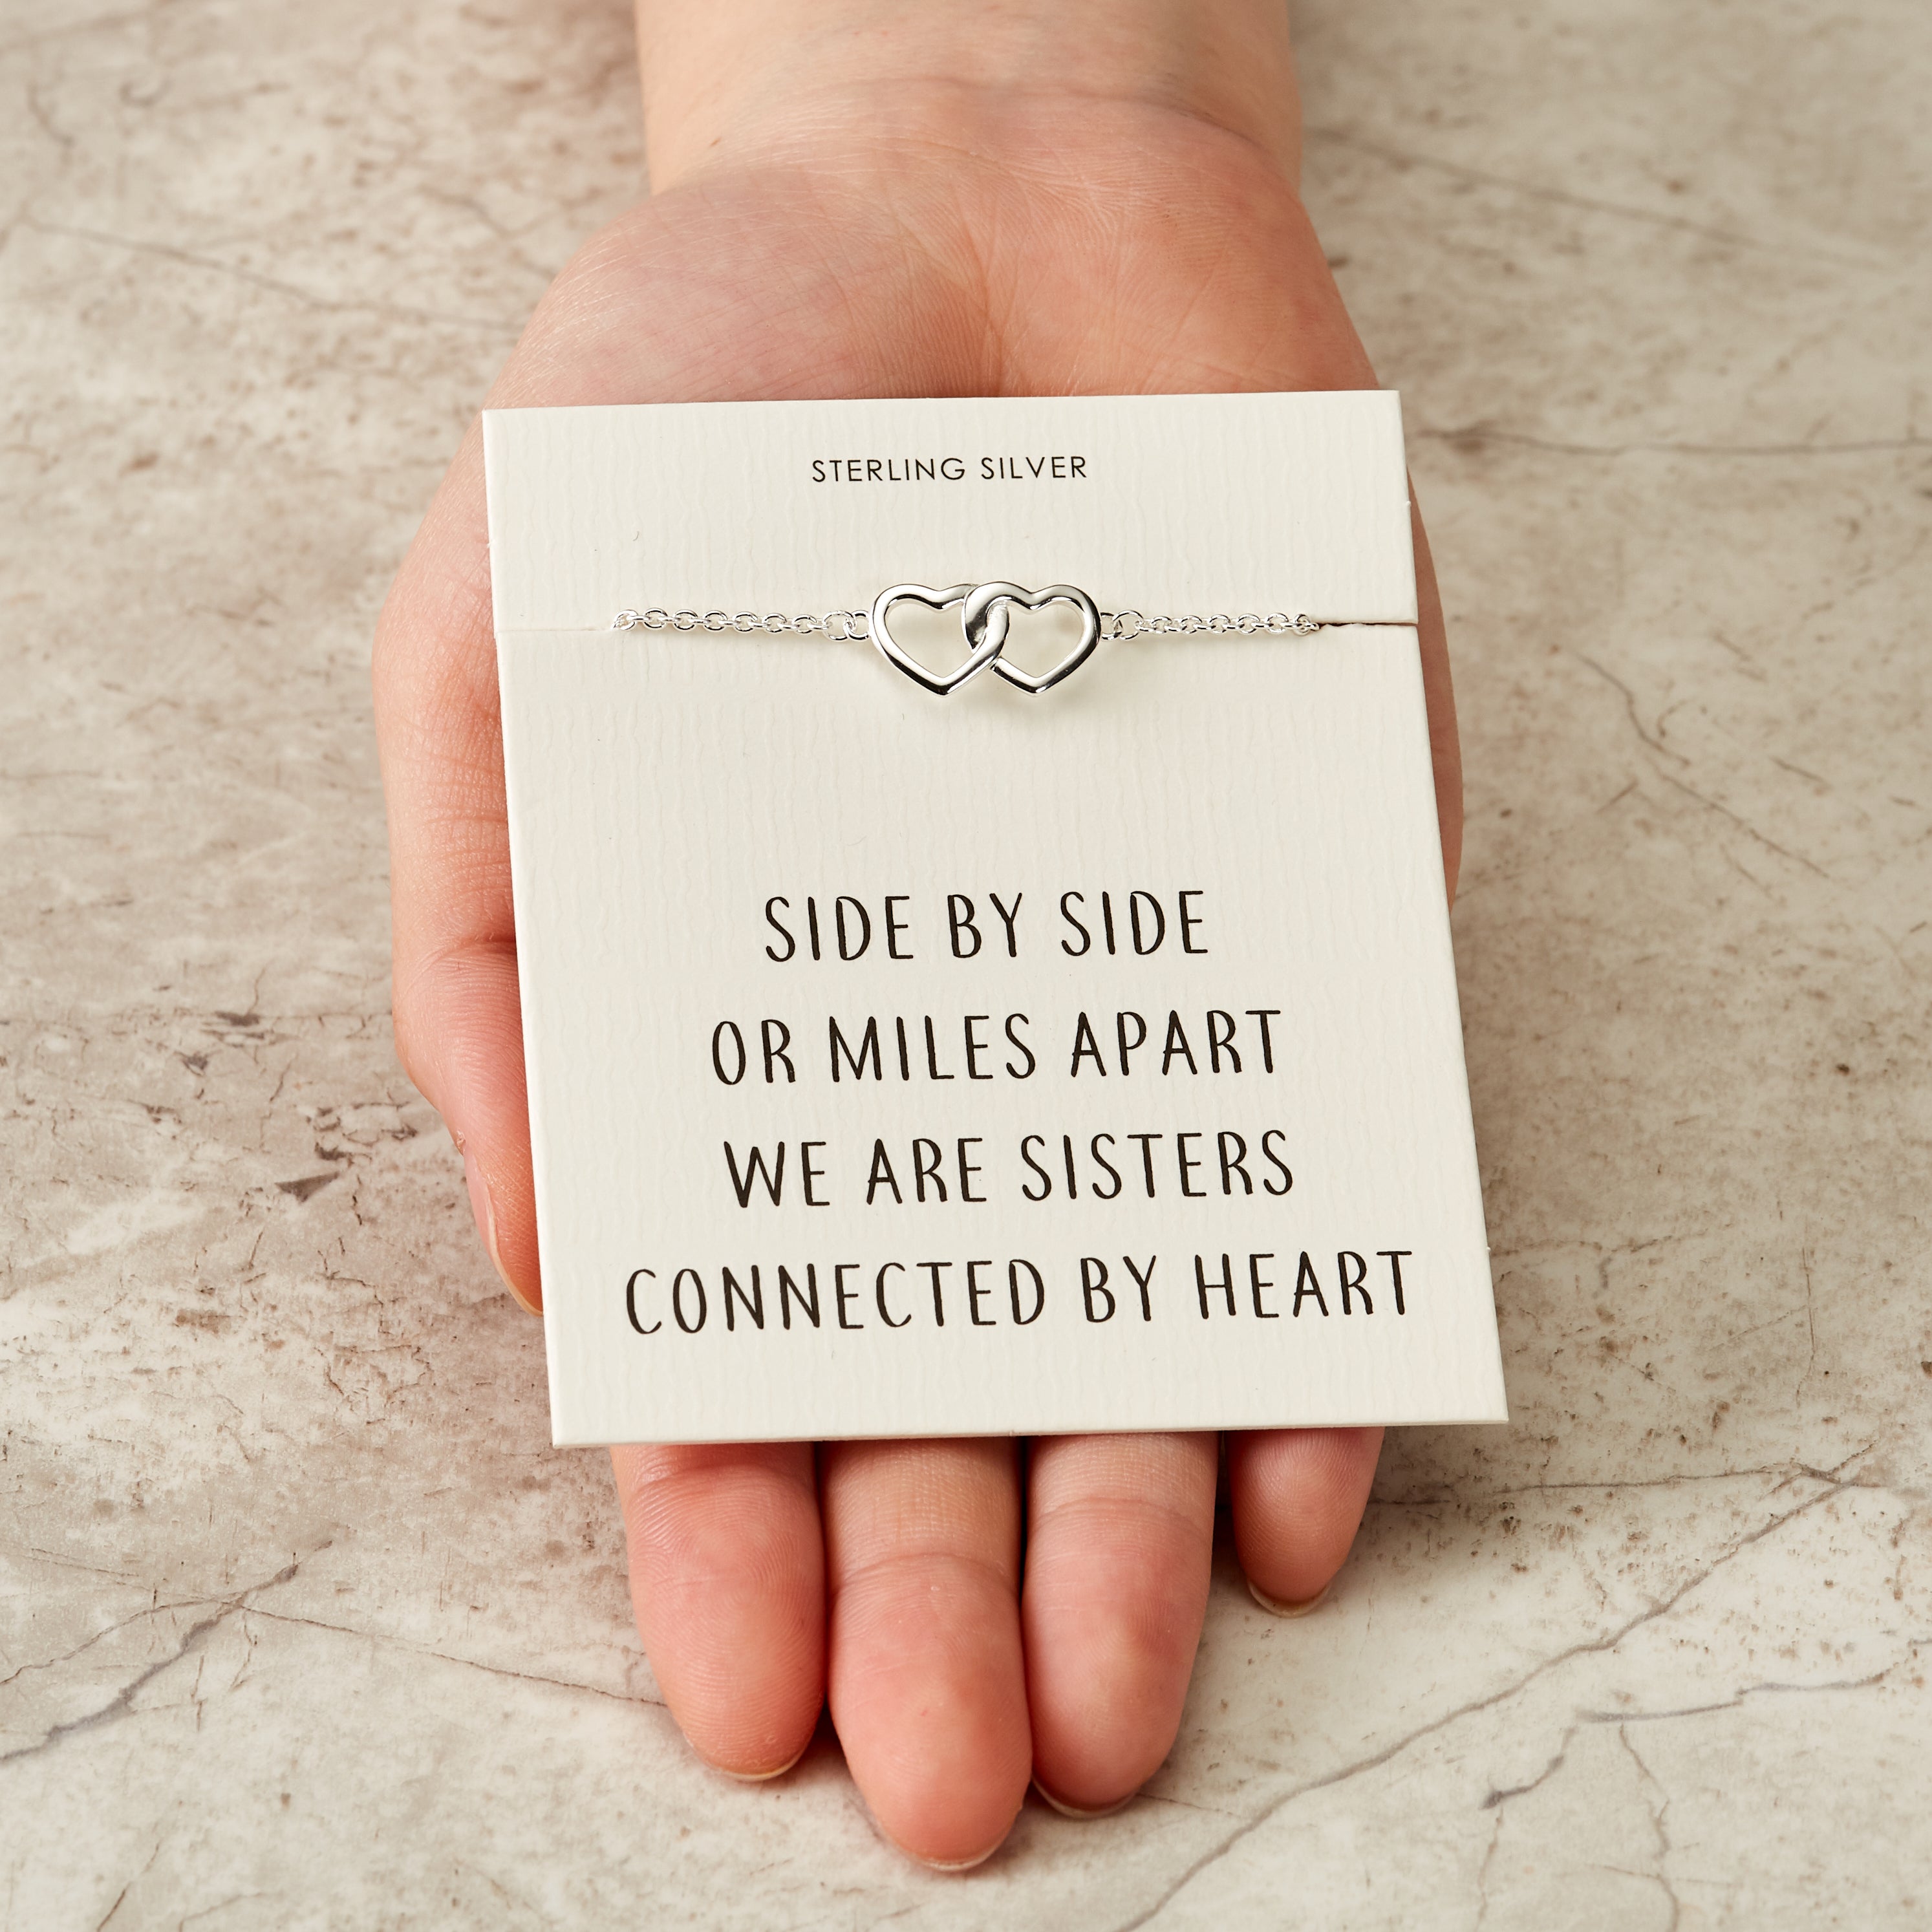 Sterling Silver Sister Heart Link Bracelet with Quote Card